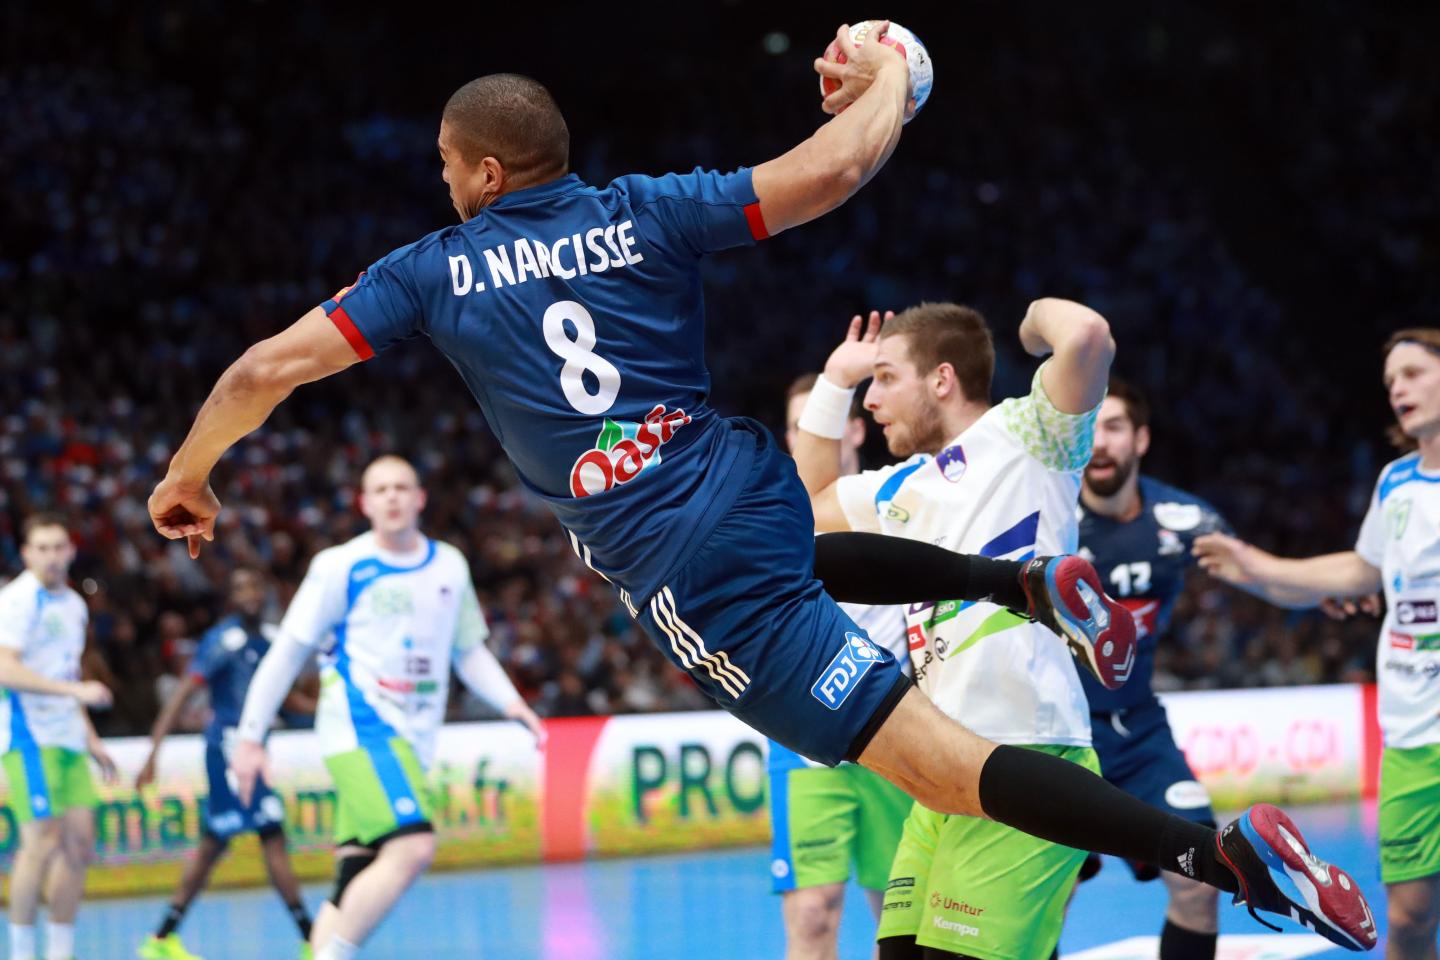 France qualify for seventh IHF World Championship final